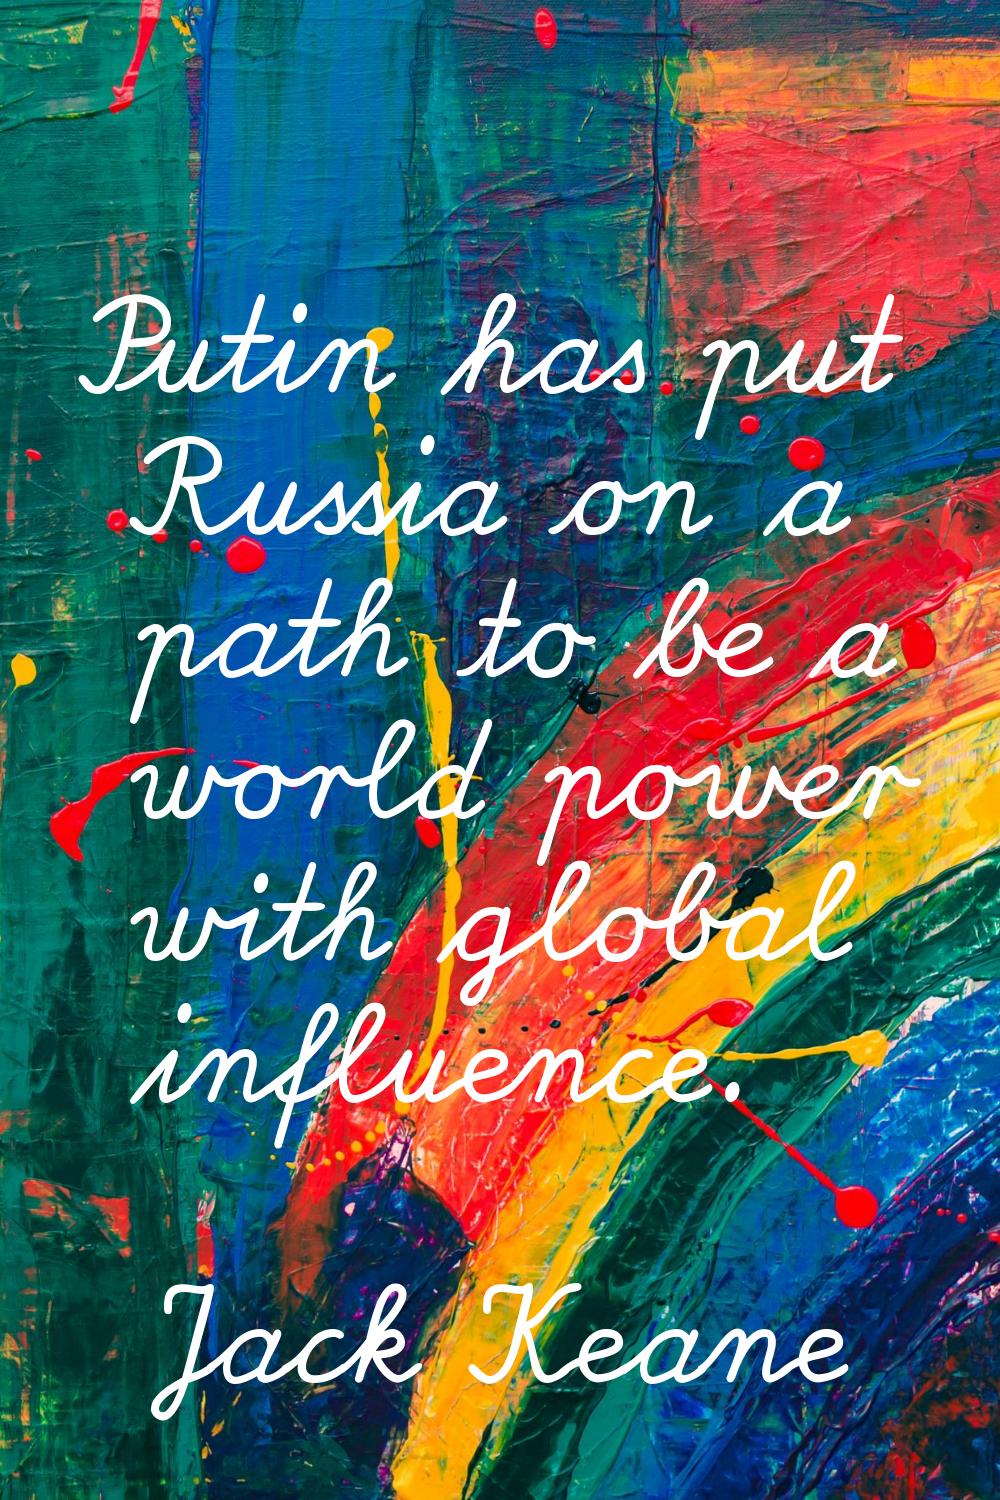 Putin has put Russia on a path to be a world power with global influence.